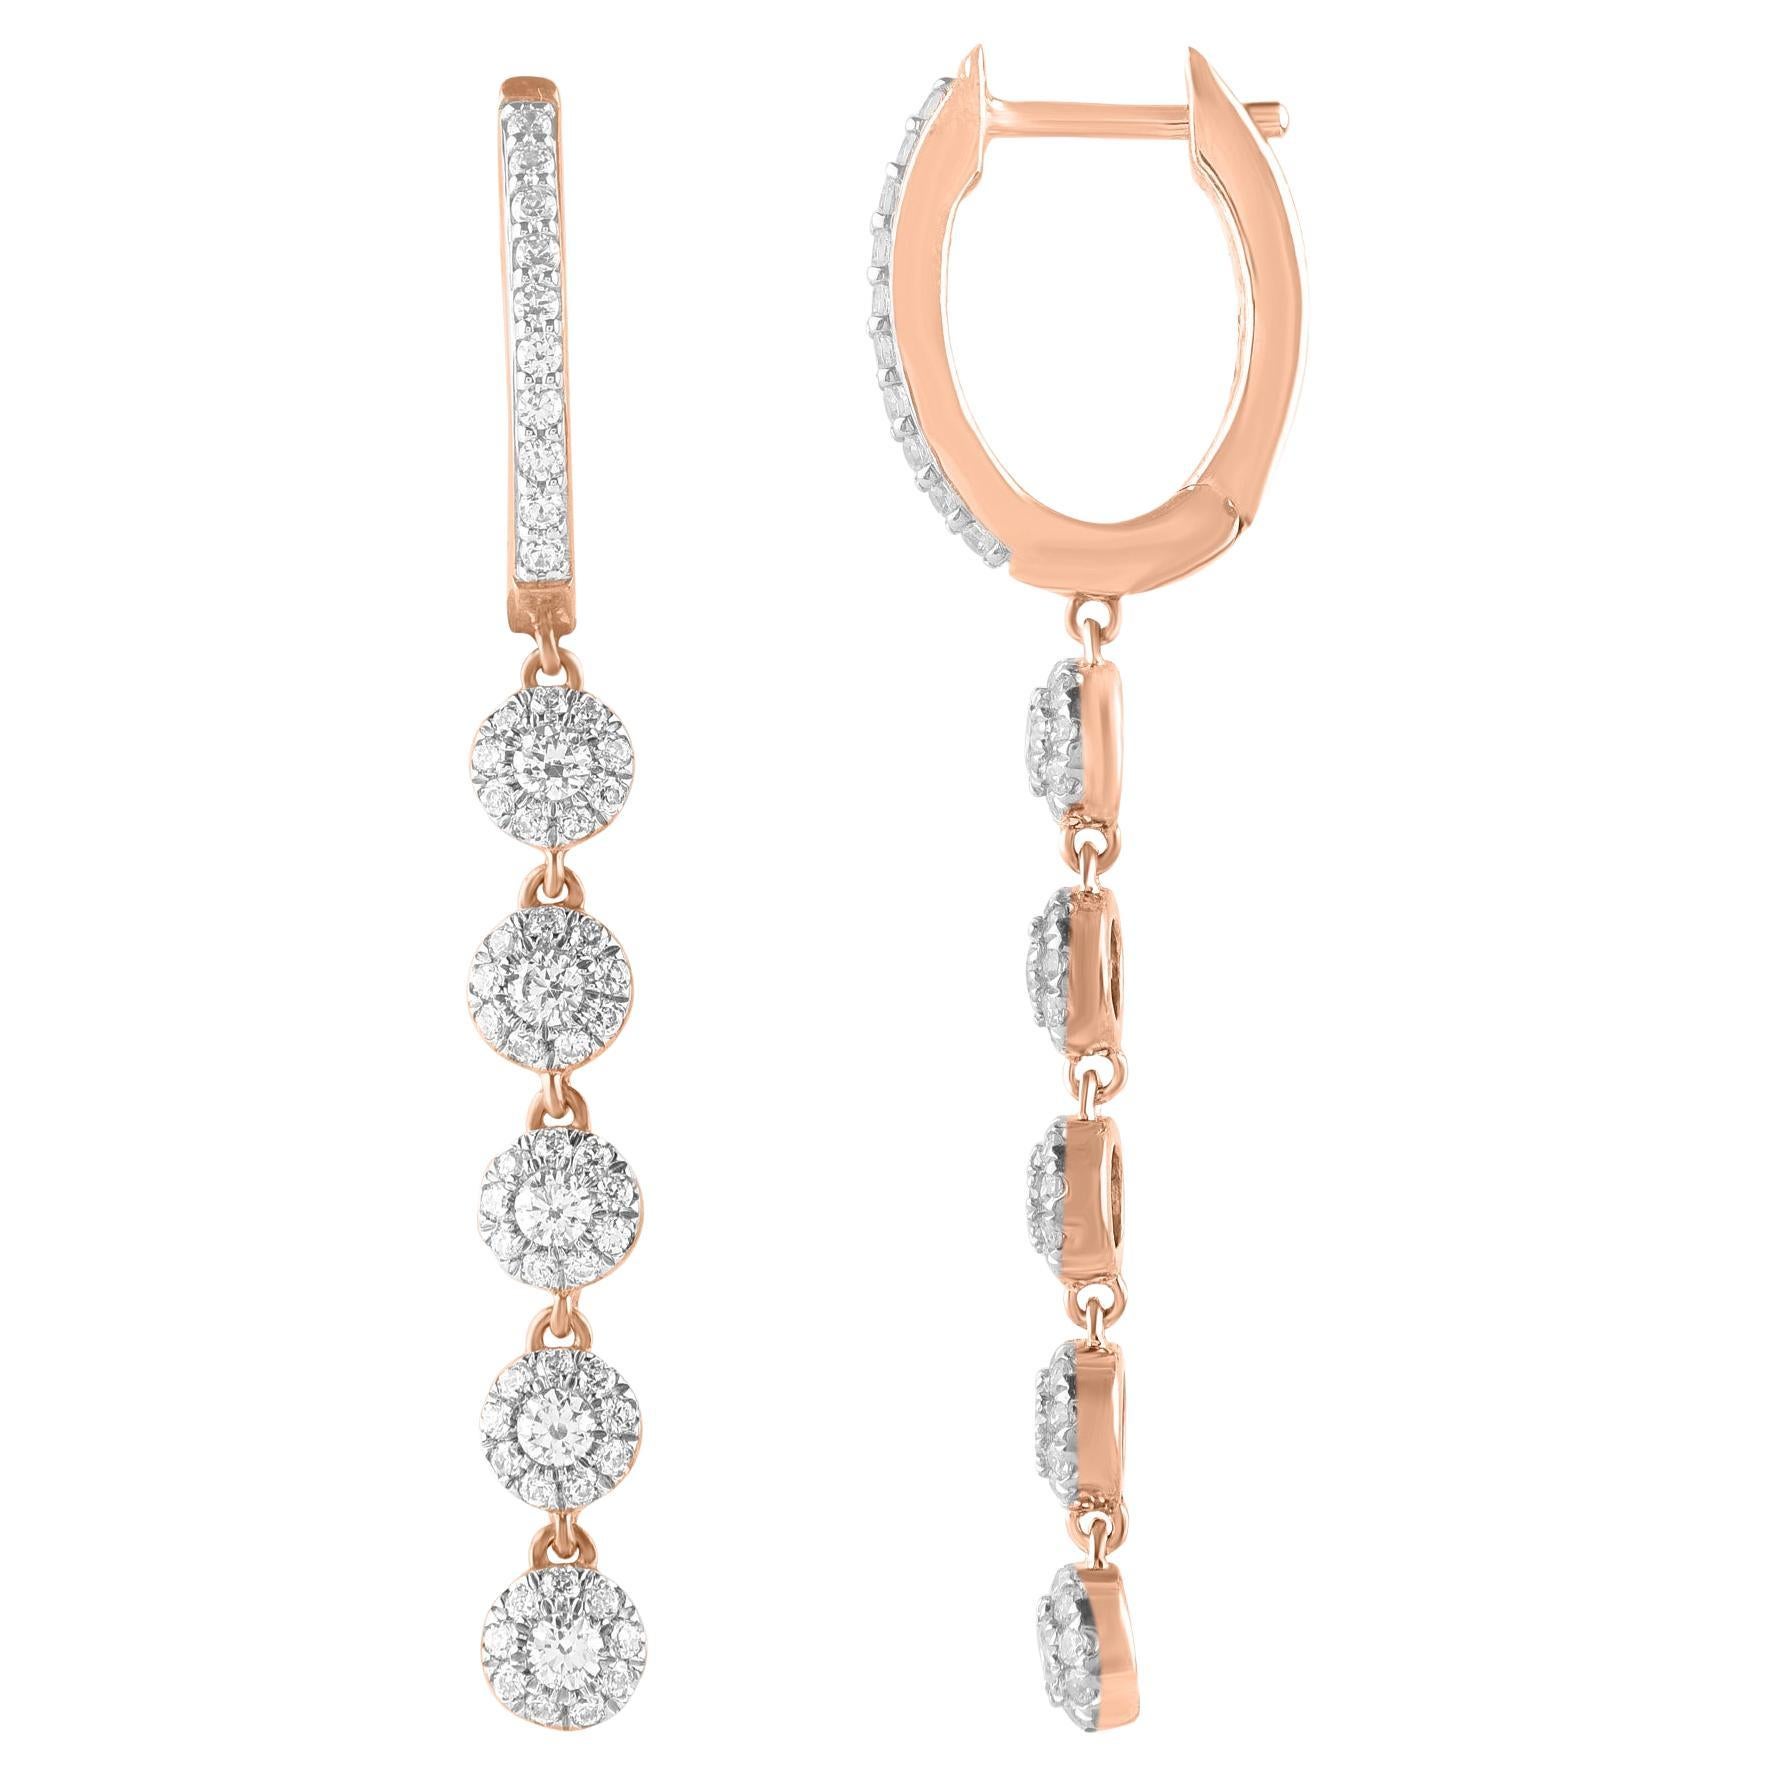 Timeless and elegant, these diamond dangle earrings go from day to night with ease. This earring is beautifully designed and studded with 120 brilliant cut and single cut natural round diamond set in prong setting and crafted in 14KT rose gold. The